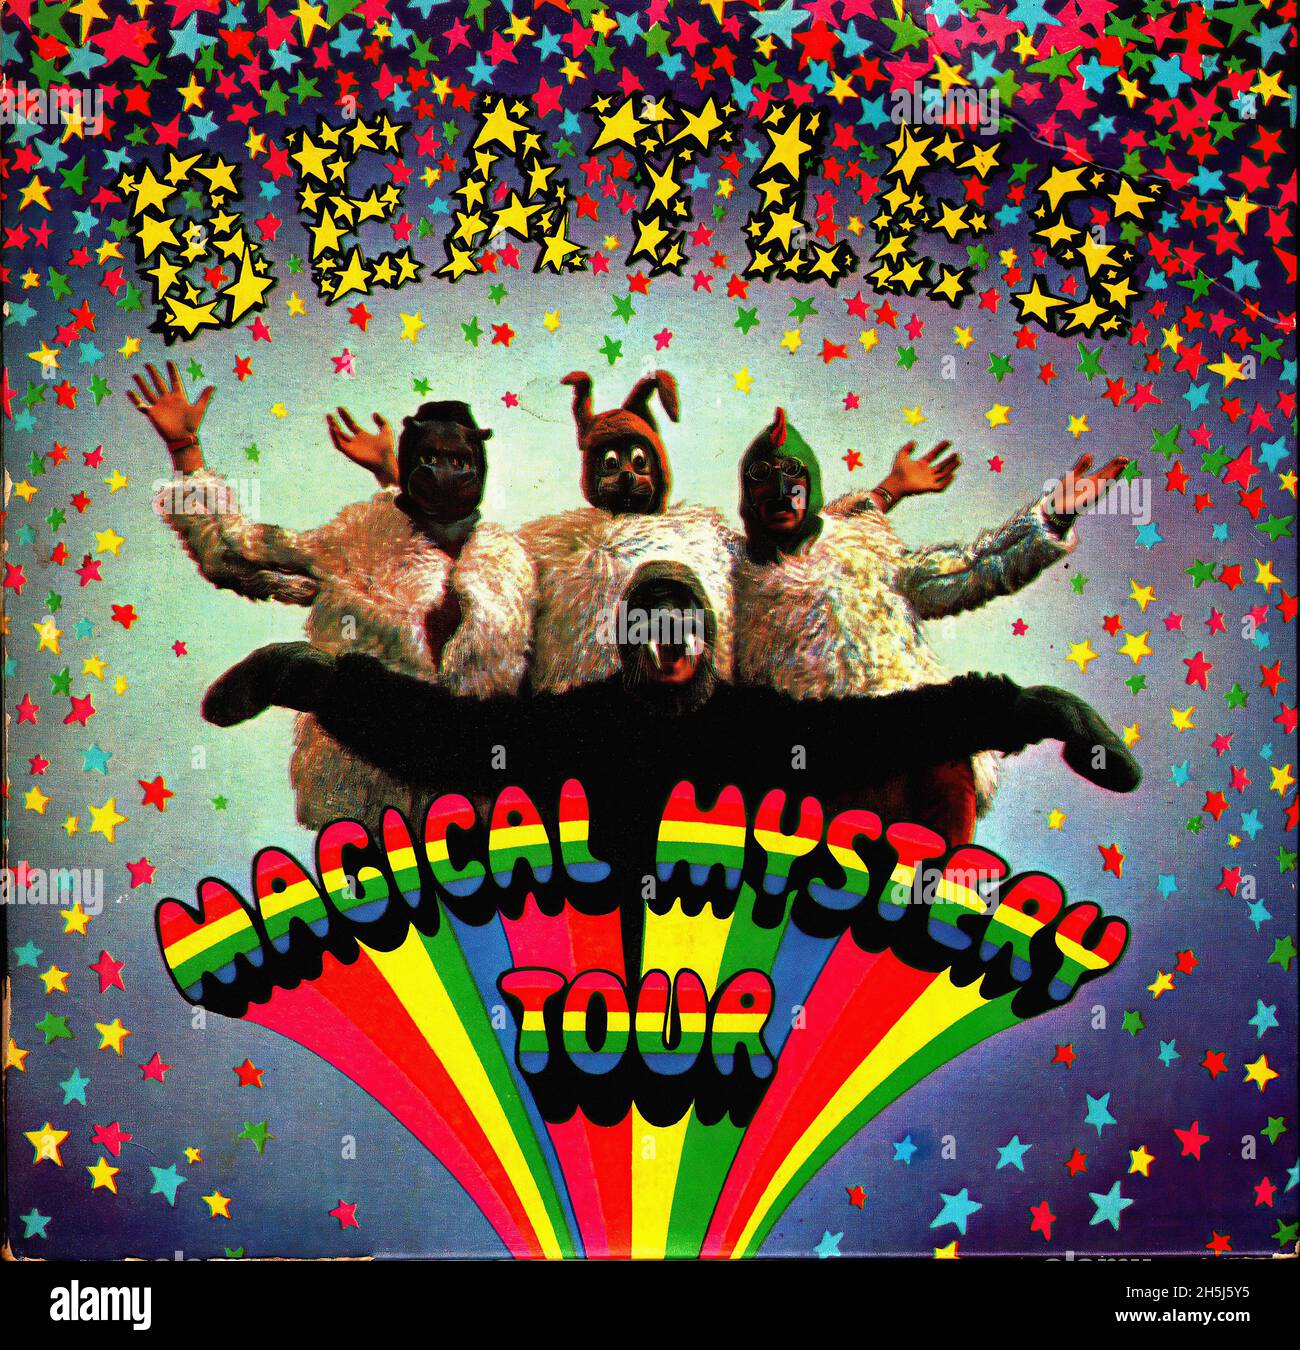 Vintage single record cover - Beatles, The - Magical Mystery Tour 